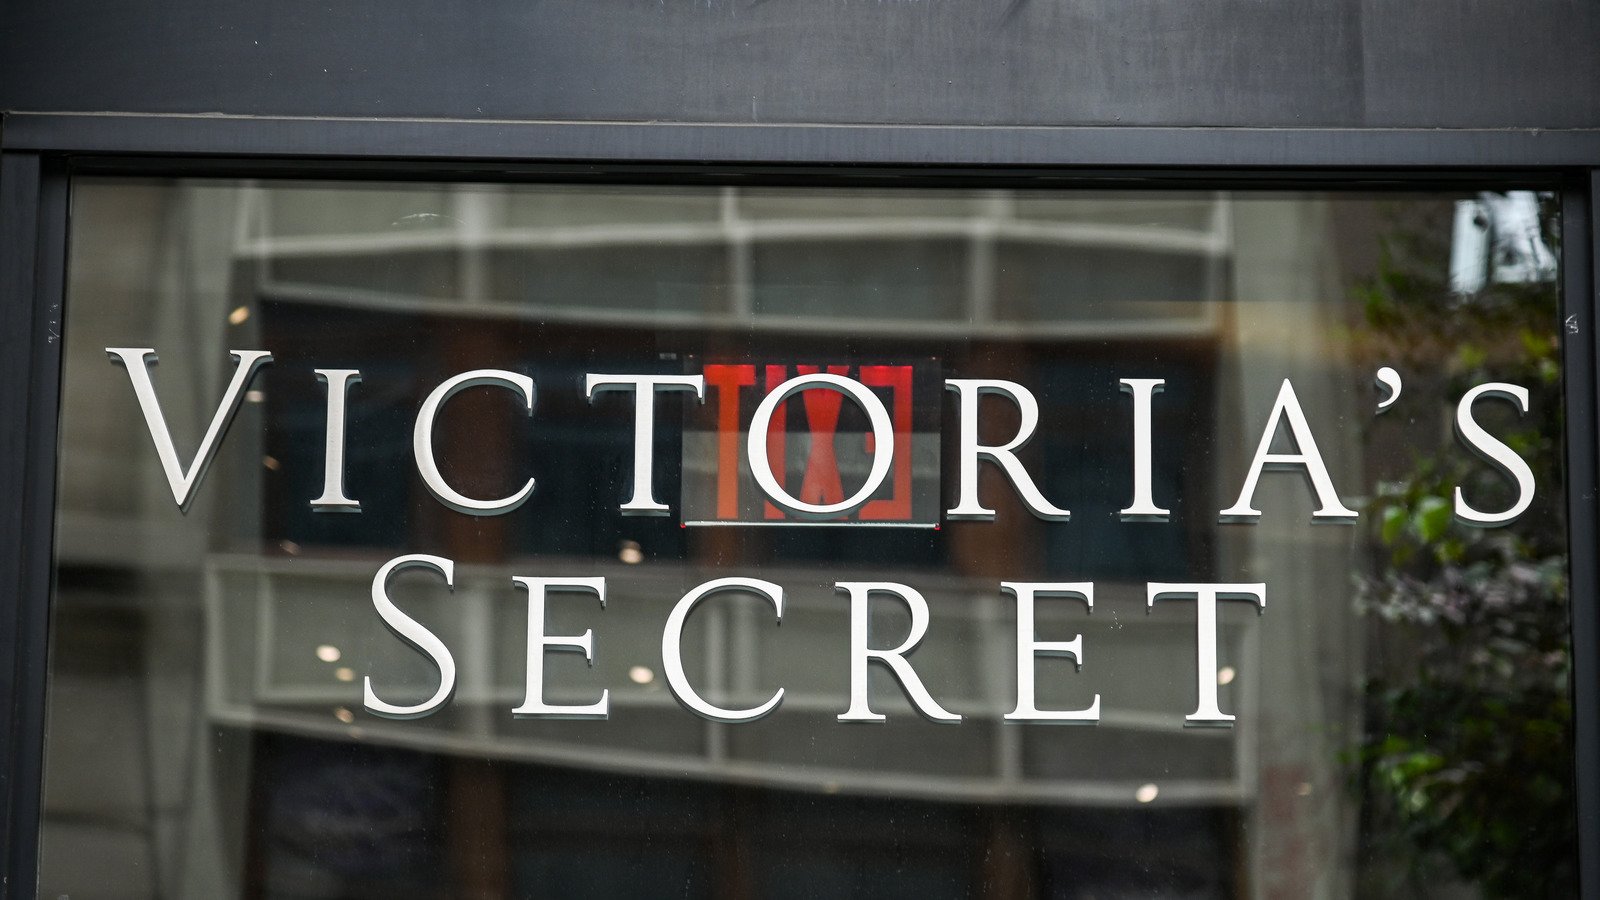 Is There A Real Victoria Behind Victoria's Secret?